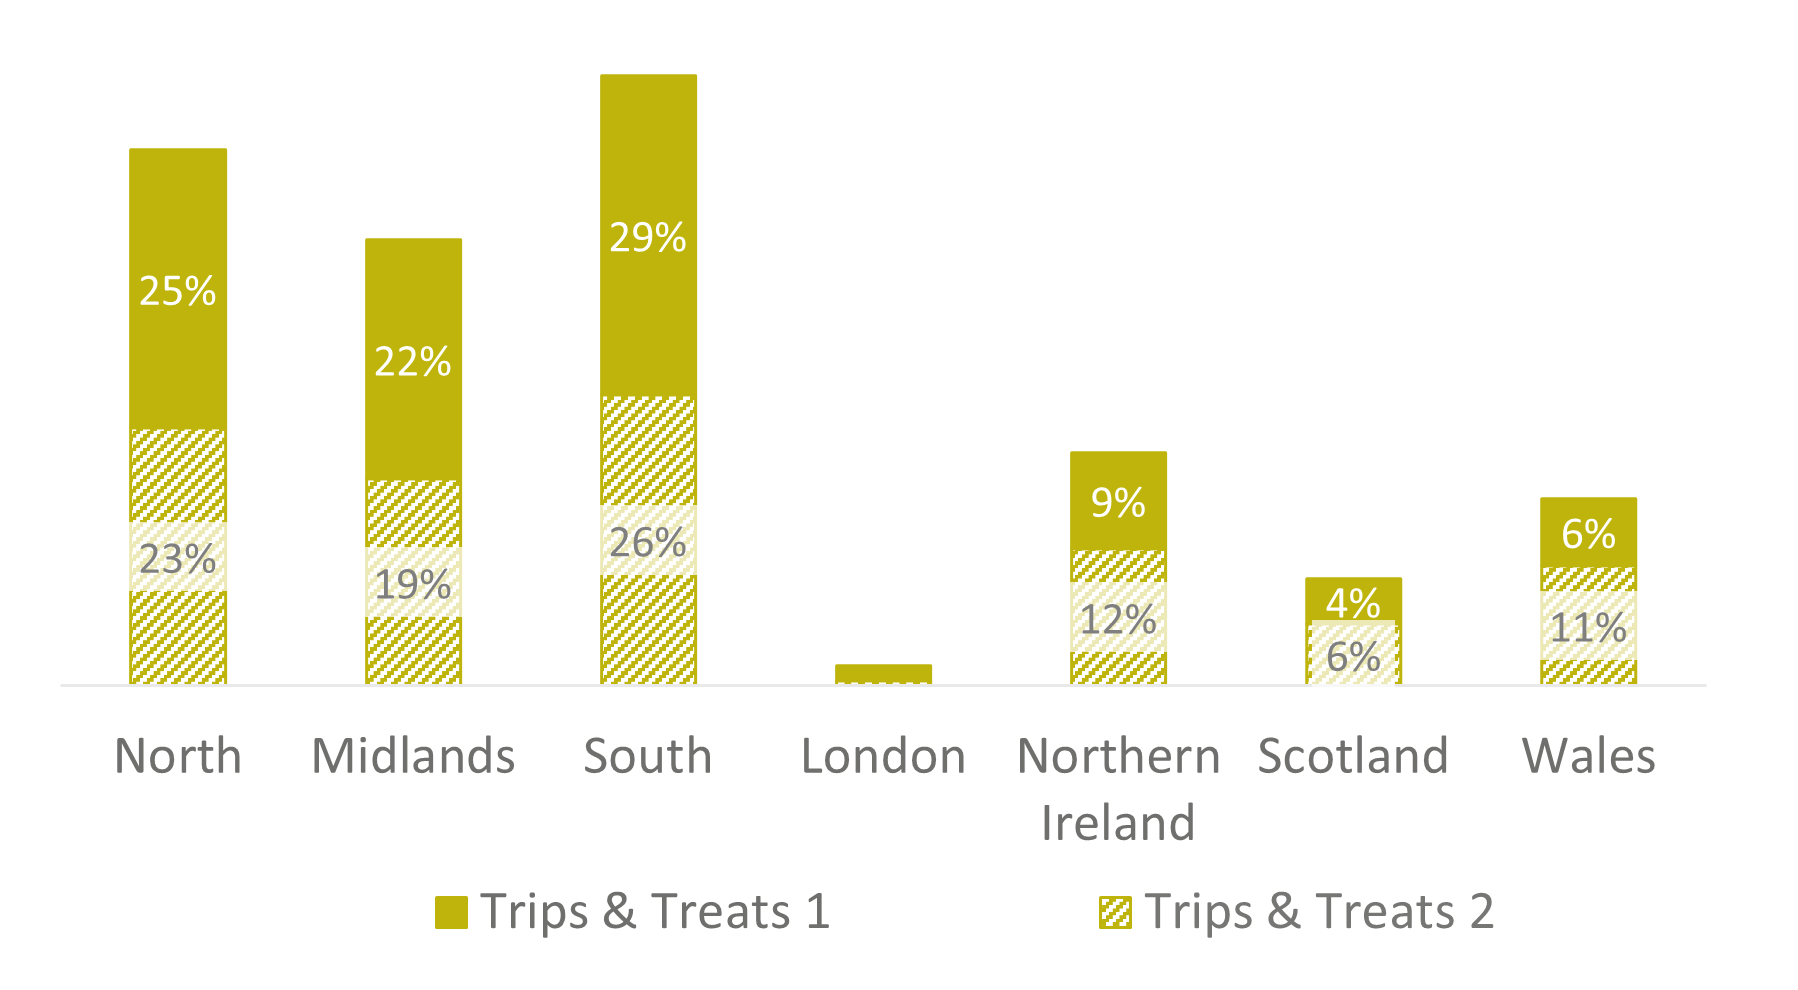 A stacked bar chart shows the subsegment split across UK regions, with the two subsegments around half of each segment across most regions. In Wales the segment 2 bar is much larger than segment 1.